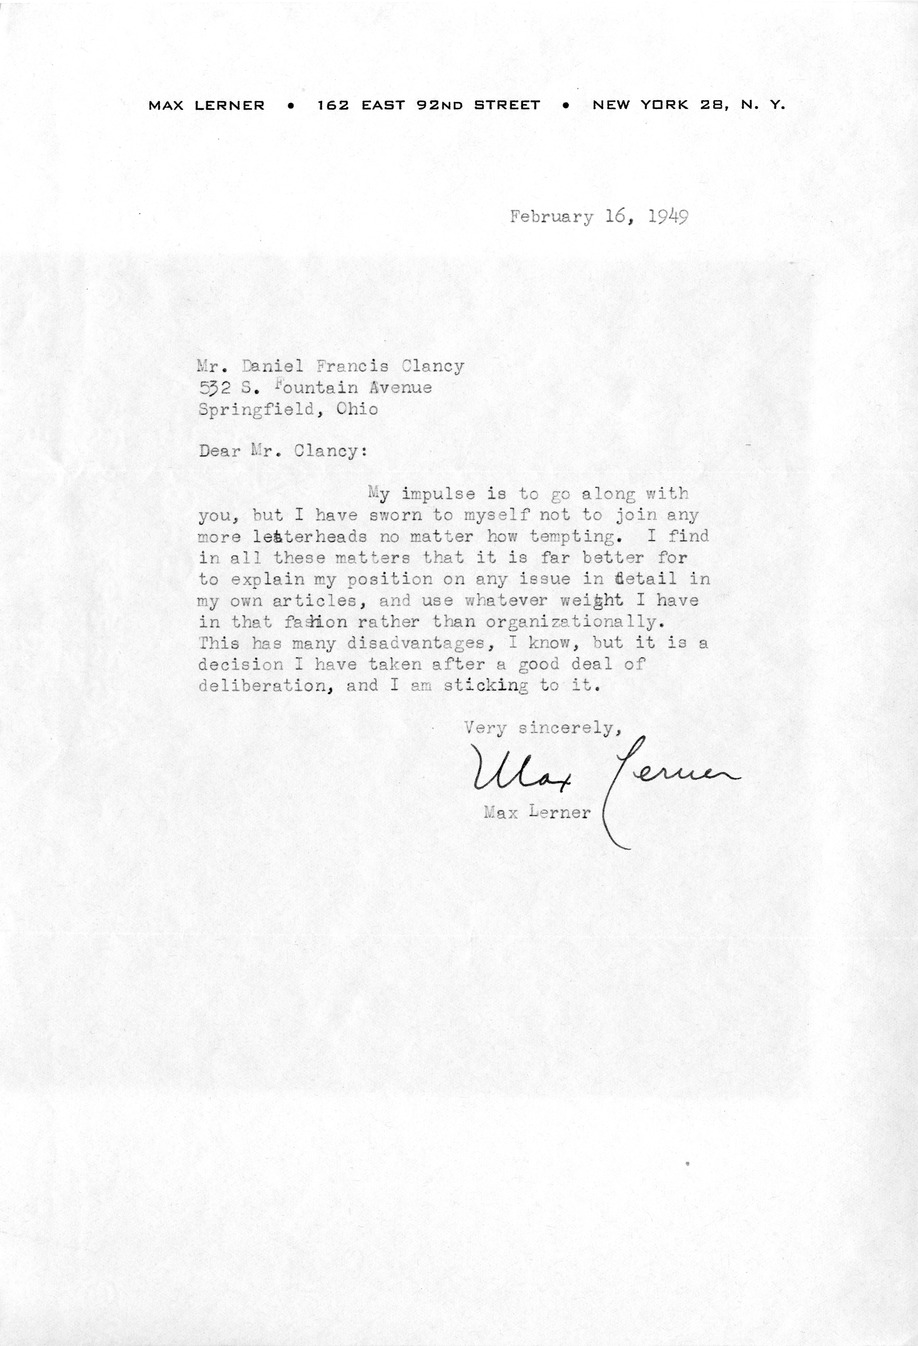 Letter from Max Lerner to Daniel F. Clancy